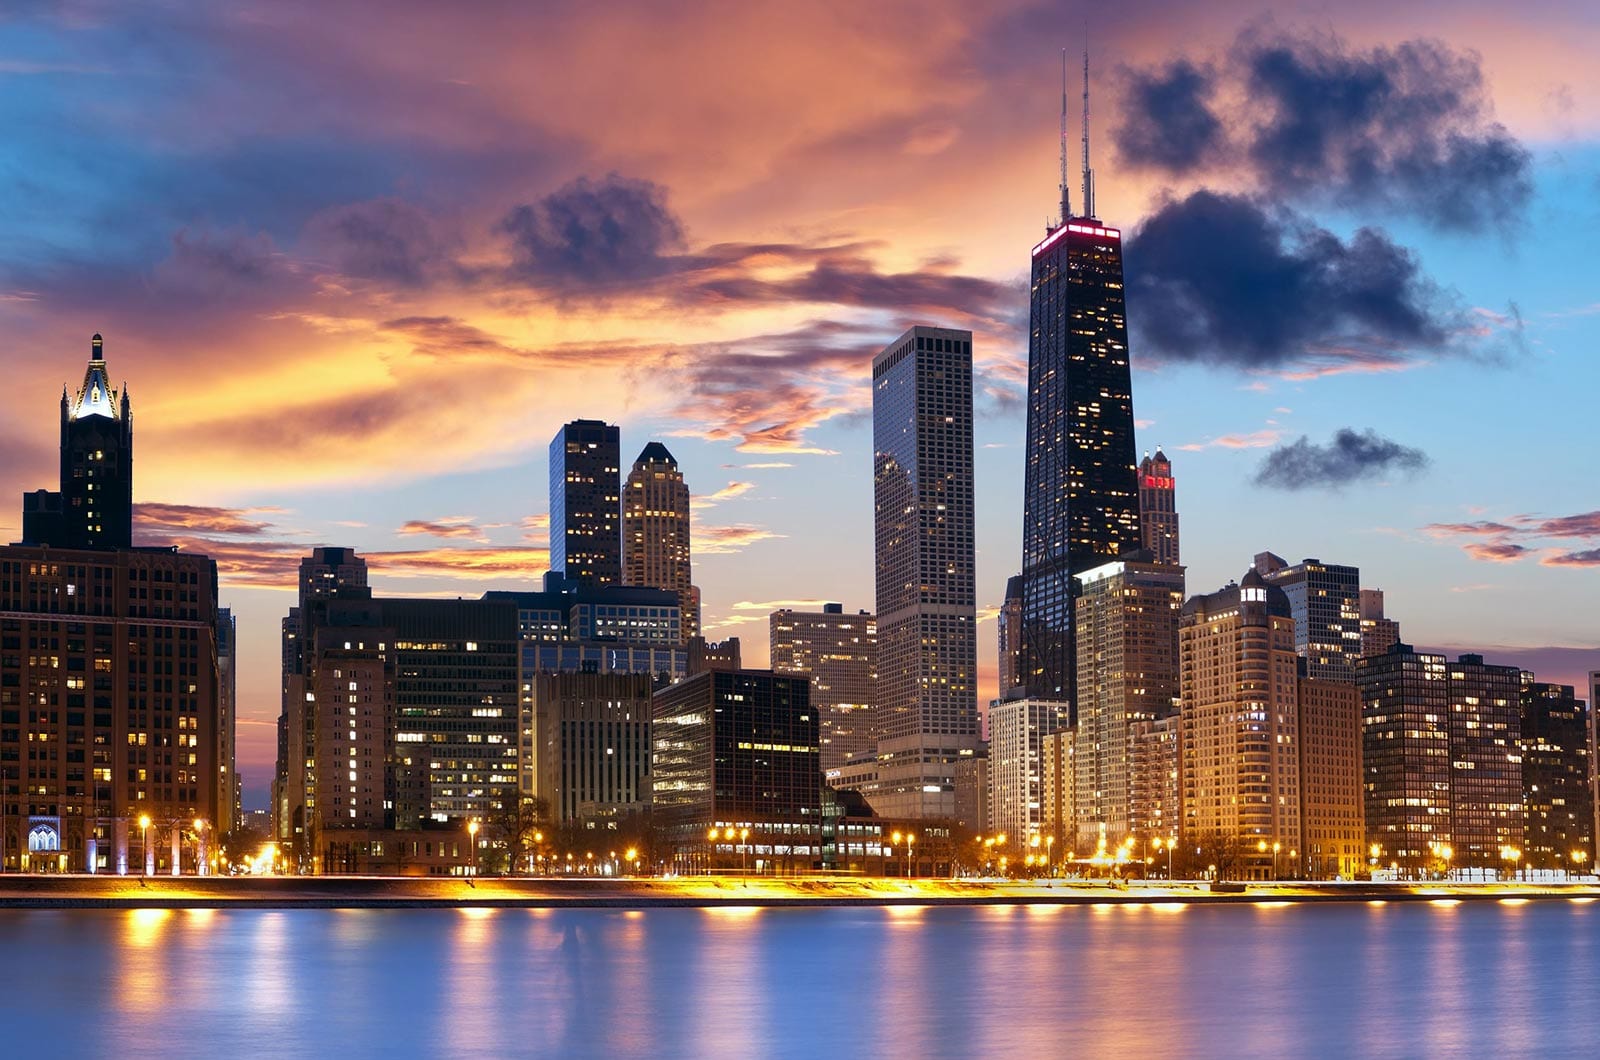 Chicago Featured Image | Chicago Virtual Tour Photographer | Chicago Aerial Photography Services | Chicago HDR Real Estate Photography Services | Chicago Matterport 3D Tours